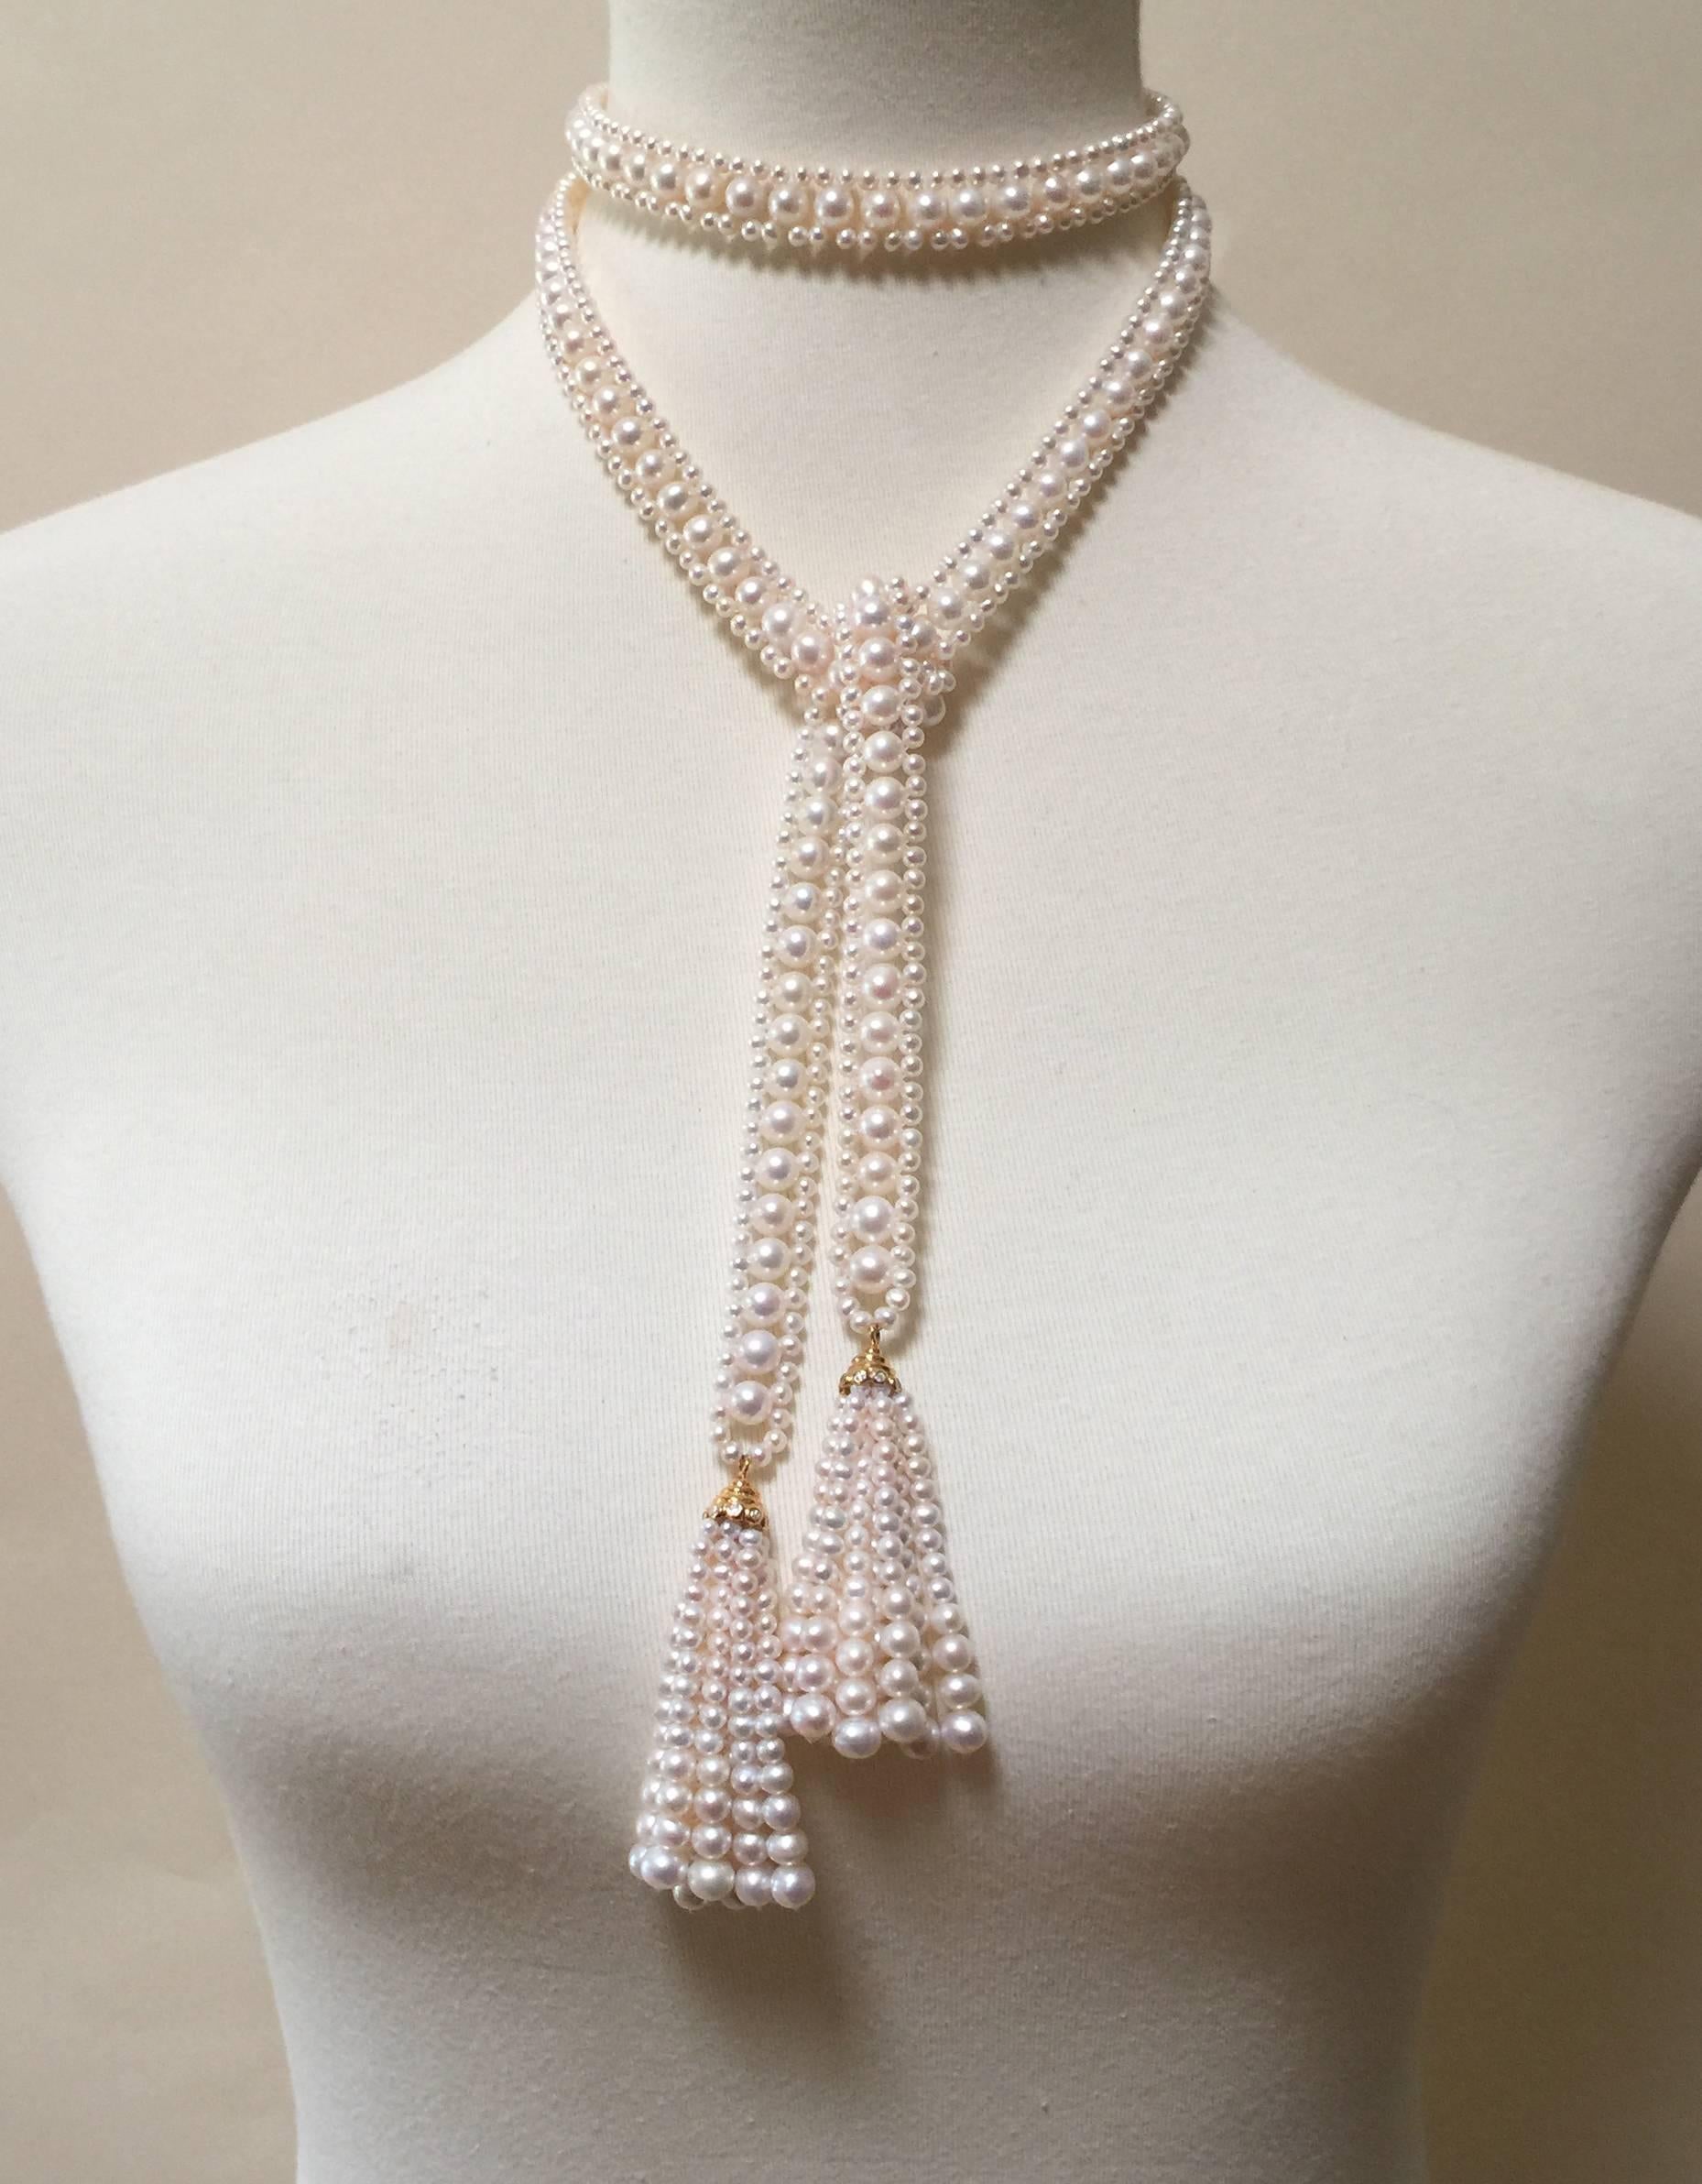 This dazzling woven pearl sautoir has an intricate rope like design with 2mm and 6mm pearls. A classic and timeless piece has a variety of wearable options at 48.5 inches long, including adding one's own brooches and family herilooms. The tassel